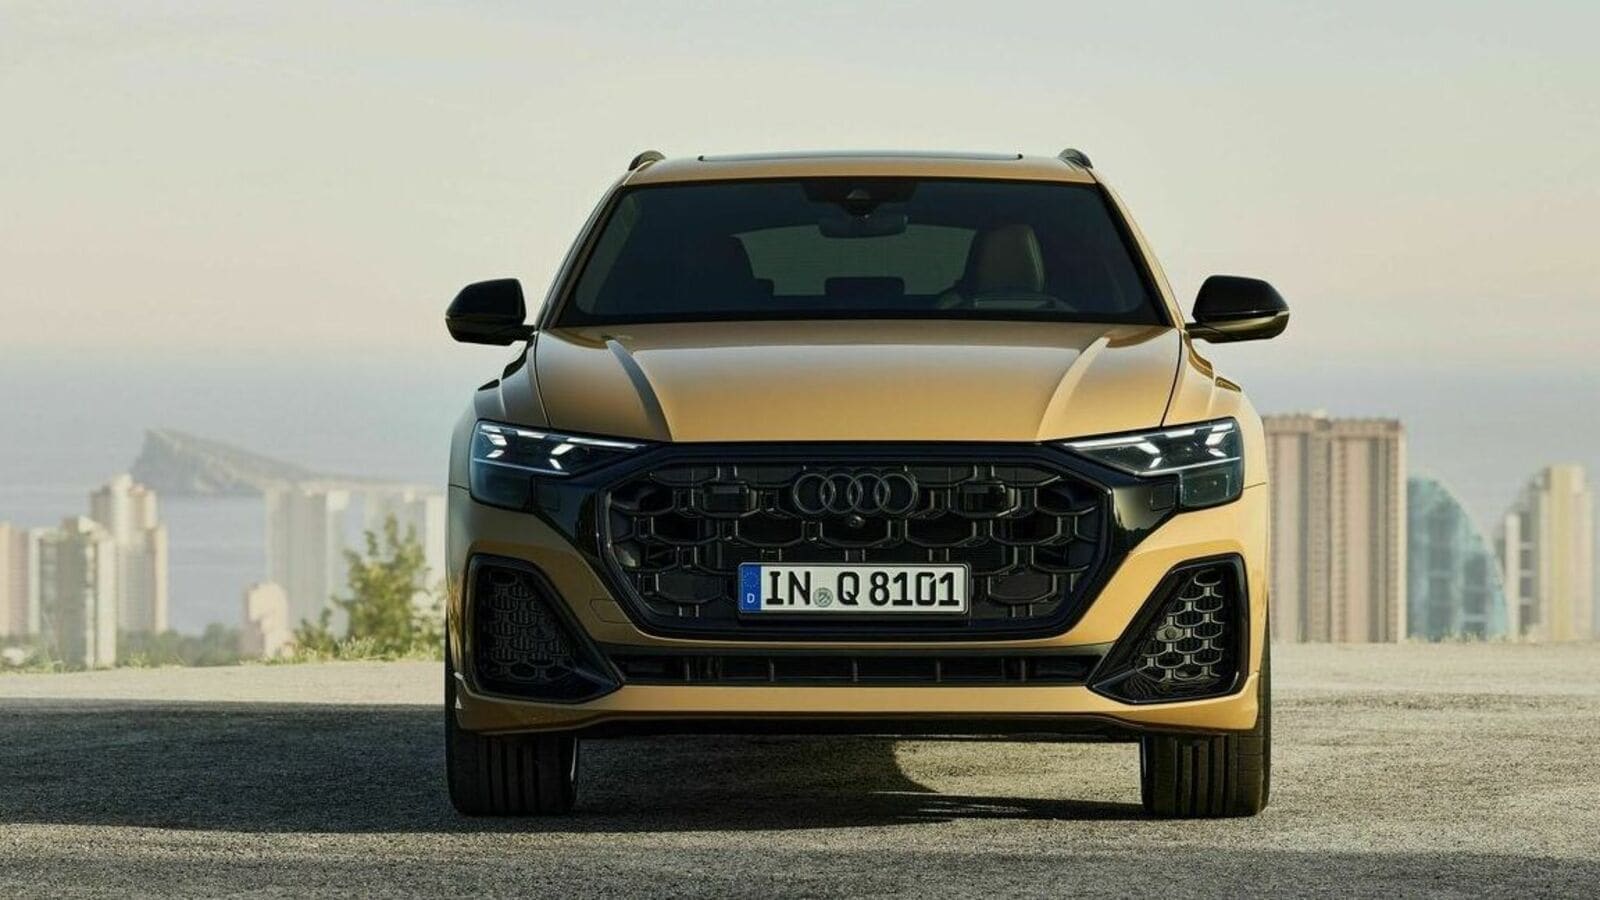 Audi Q8 updated with new features and aggressive design. Check details